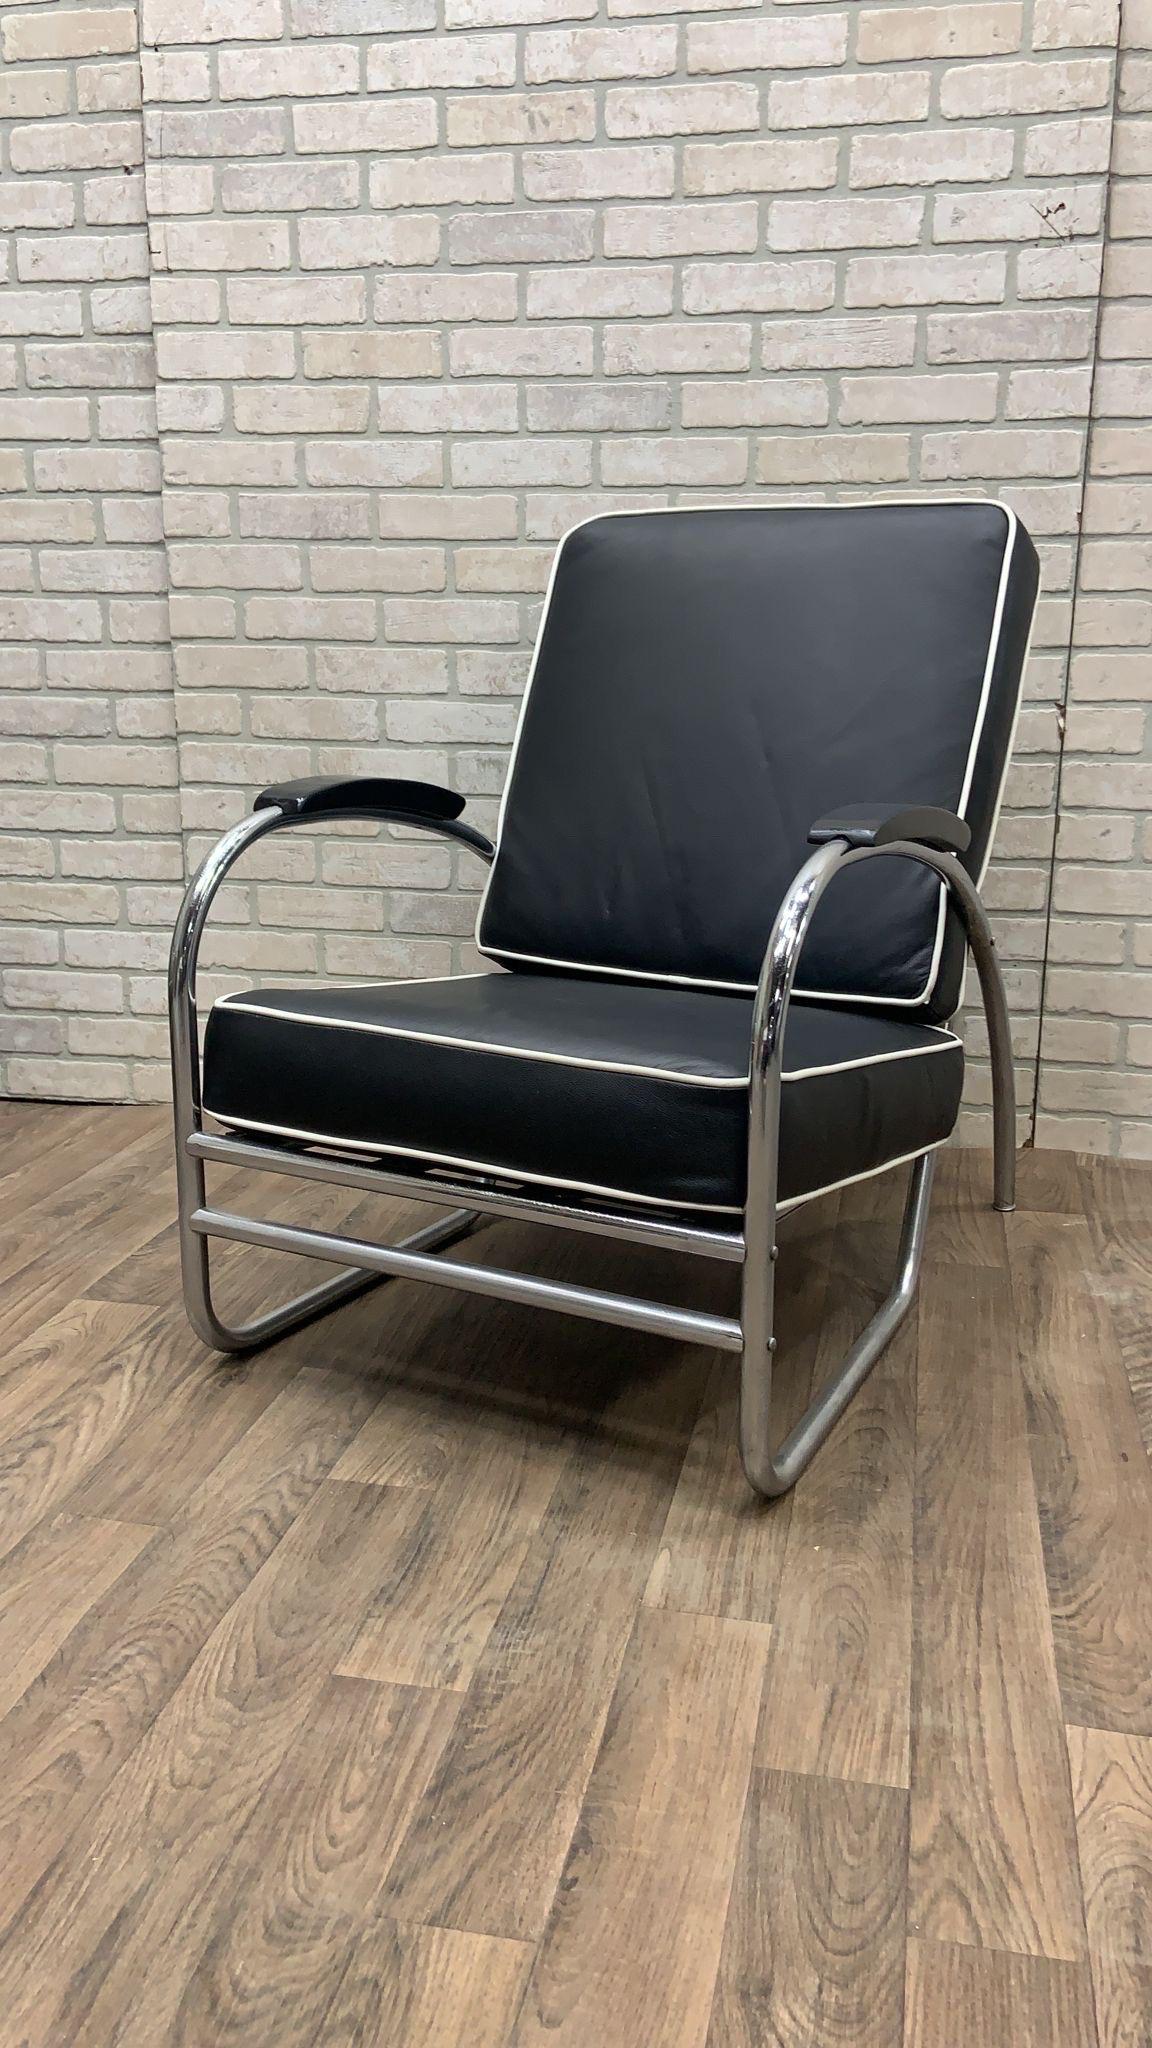 Art Deco Chrome Tubular Sofa & Lounge Chair Set in Black Leather - Set of 2 

This exquisite Art Deco sofa and lounge chair set designed by Kem Weber showcases the iconic streamline moderne style with its sleek chrome tubular frame and aerodynamic